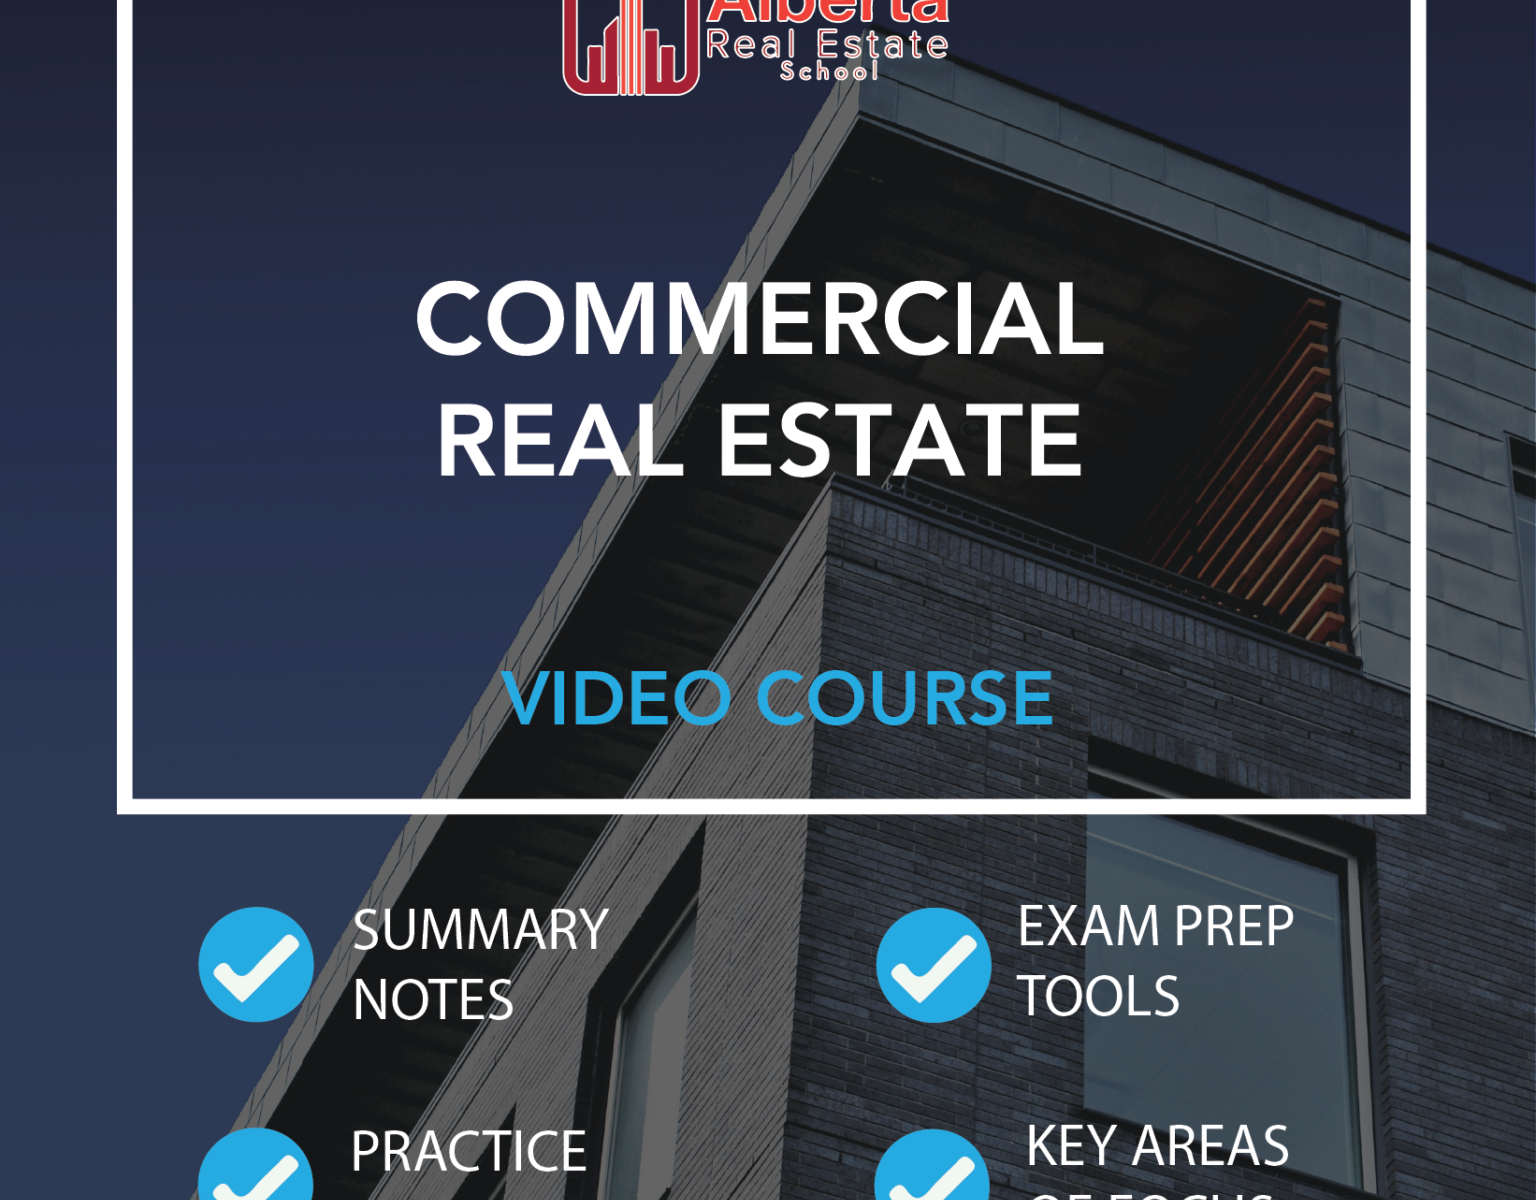 Practice of Commercial Real Estate